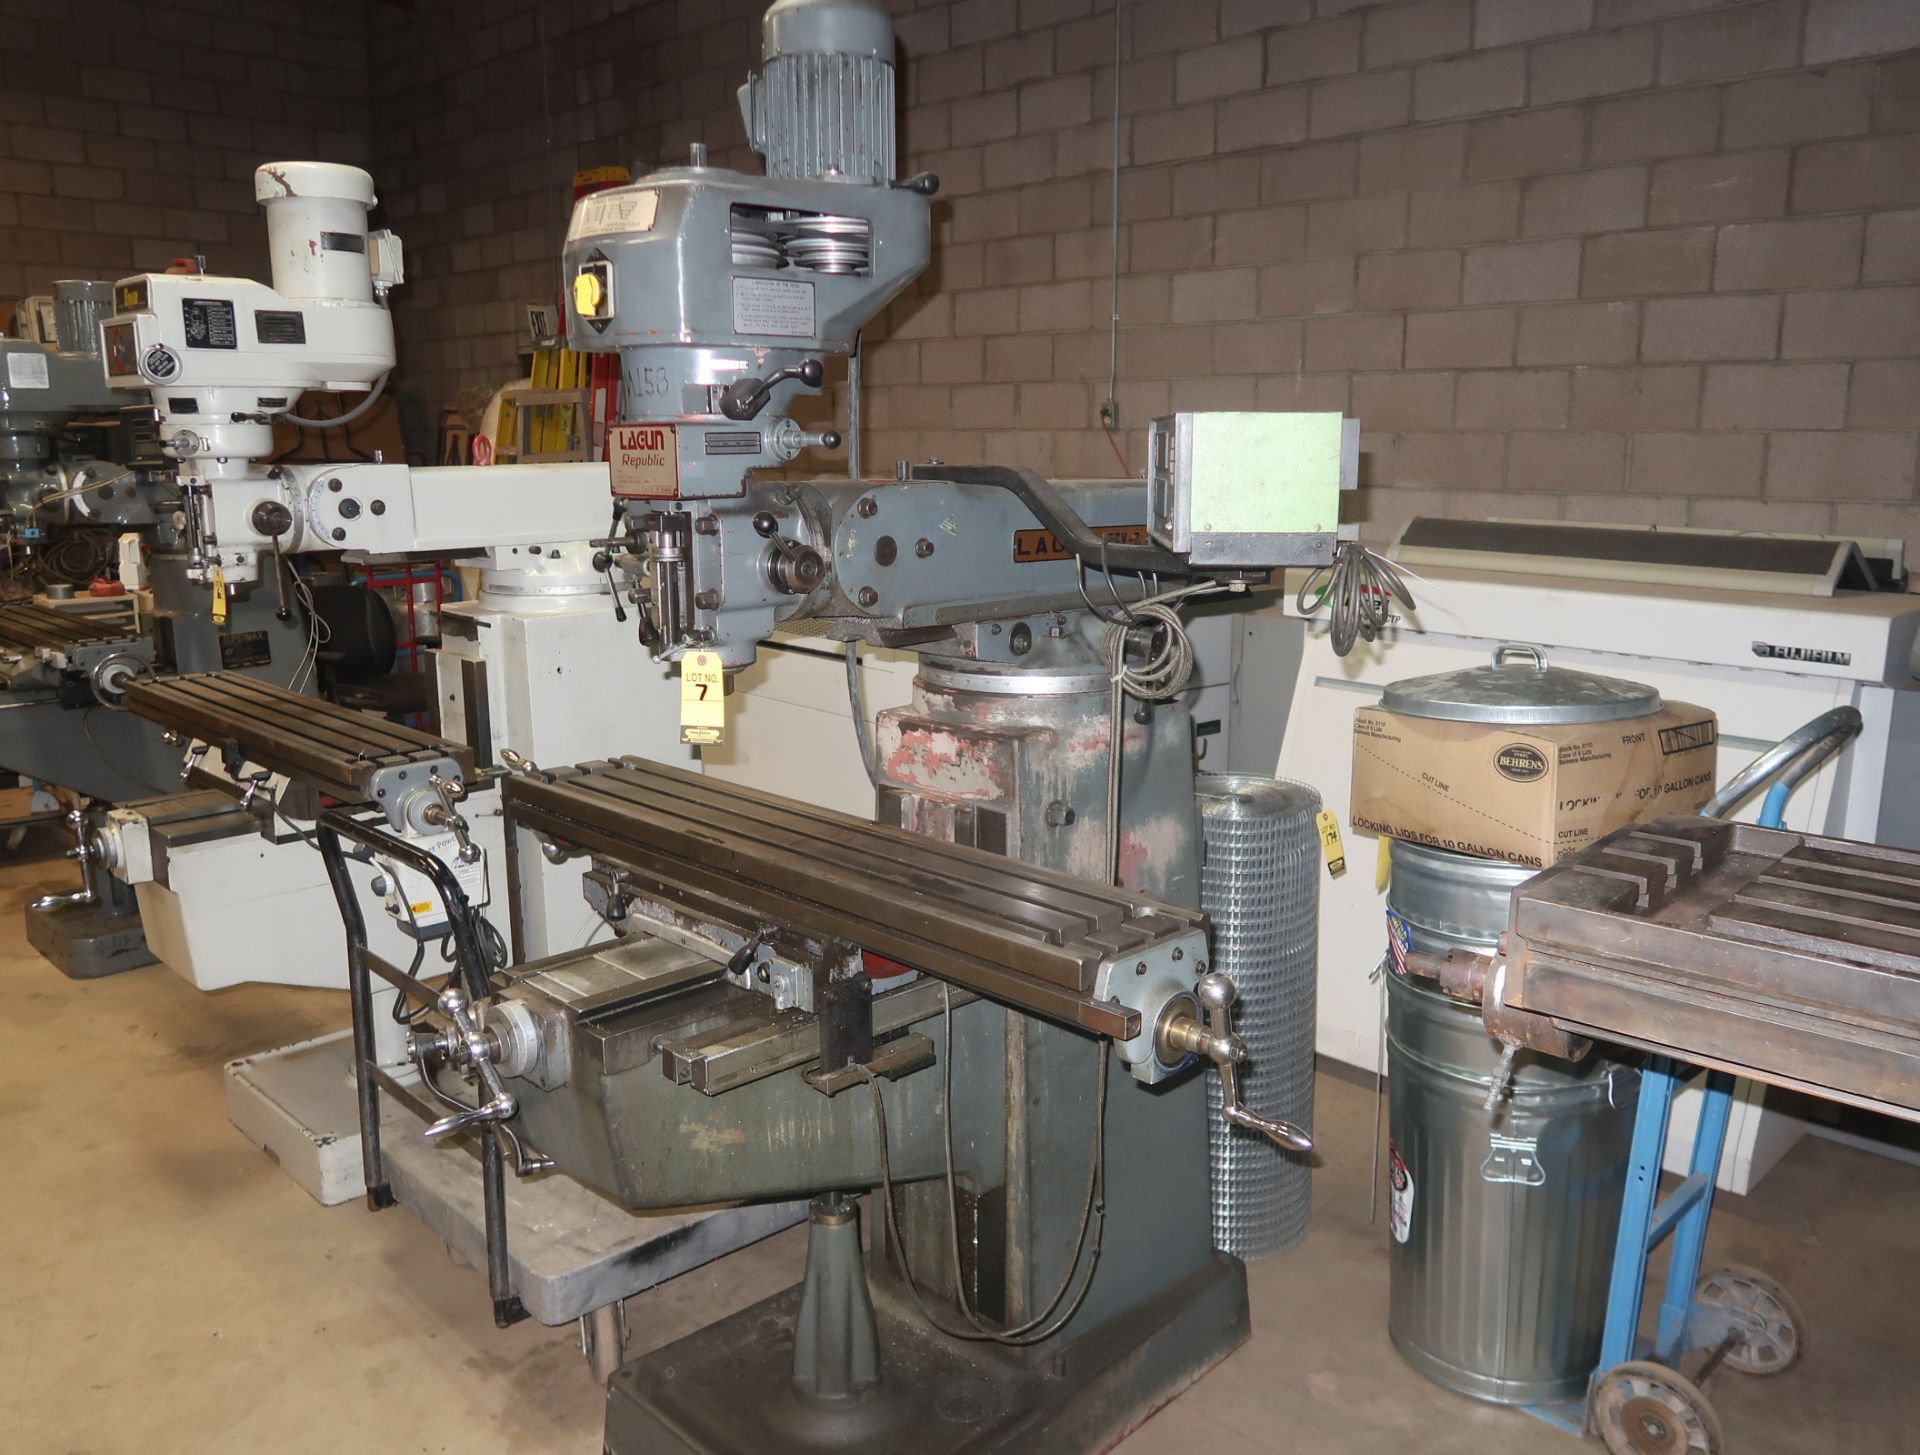 LAGUN VERTICAL MILL, MDL. FTV-2, 48" X 9" TABLE, MITUTOYO 2-AXIS DRO, VARIABLE SPEED BELT HEAD - Image 2 of 3